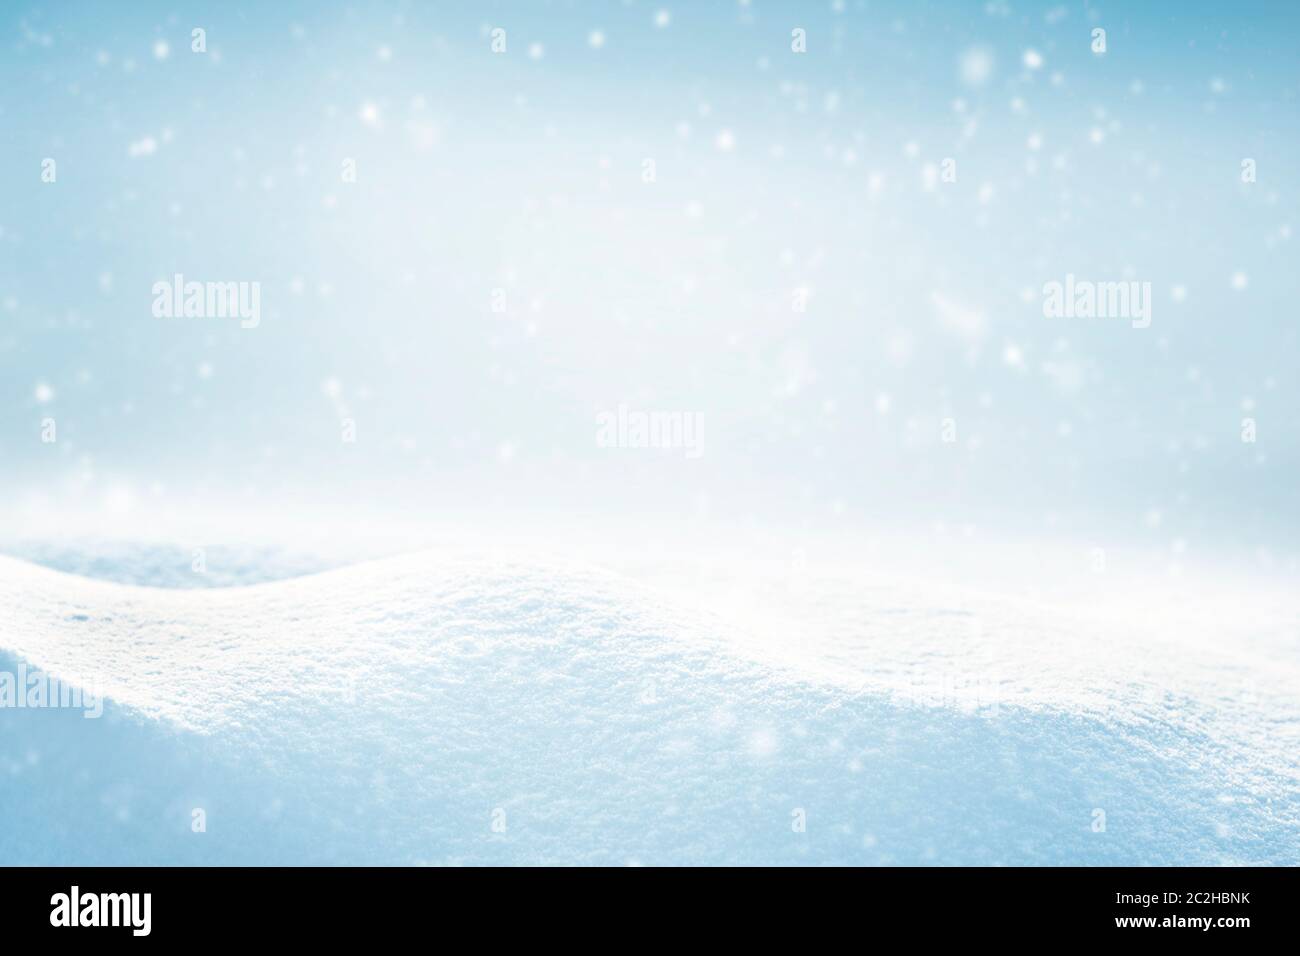 winter background with snowflakes Stock Photo